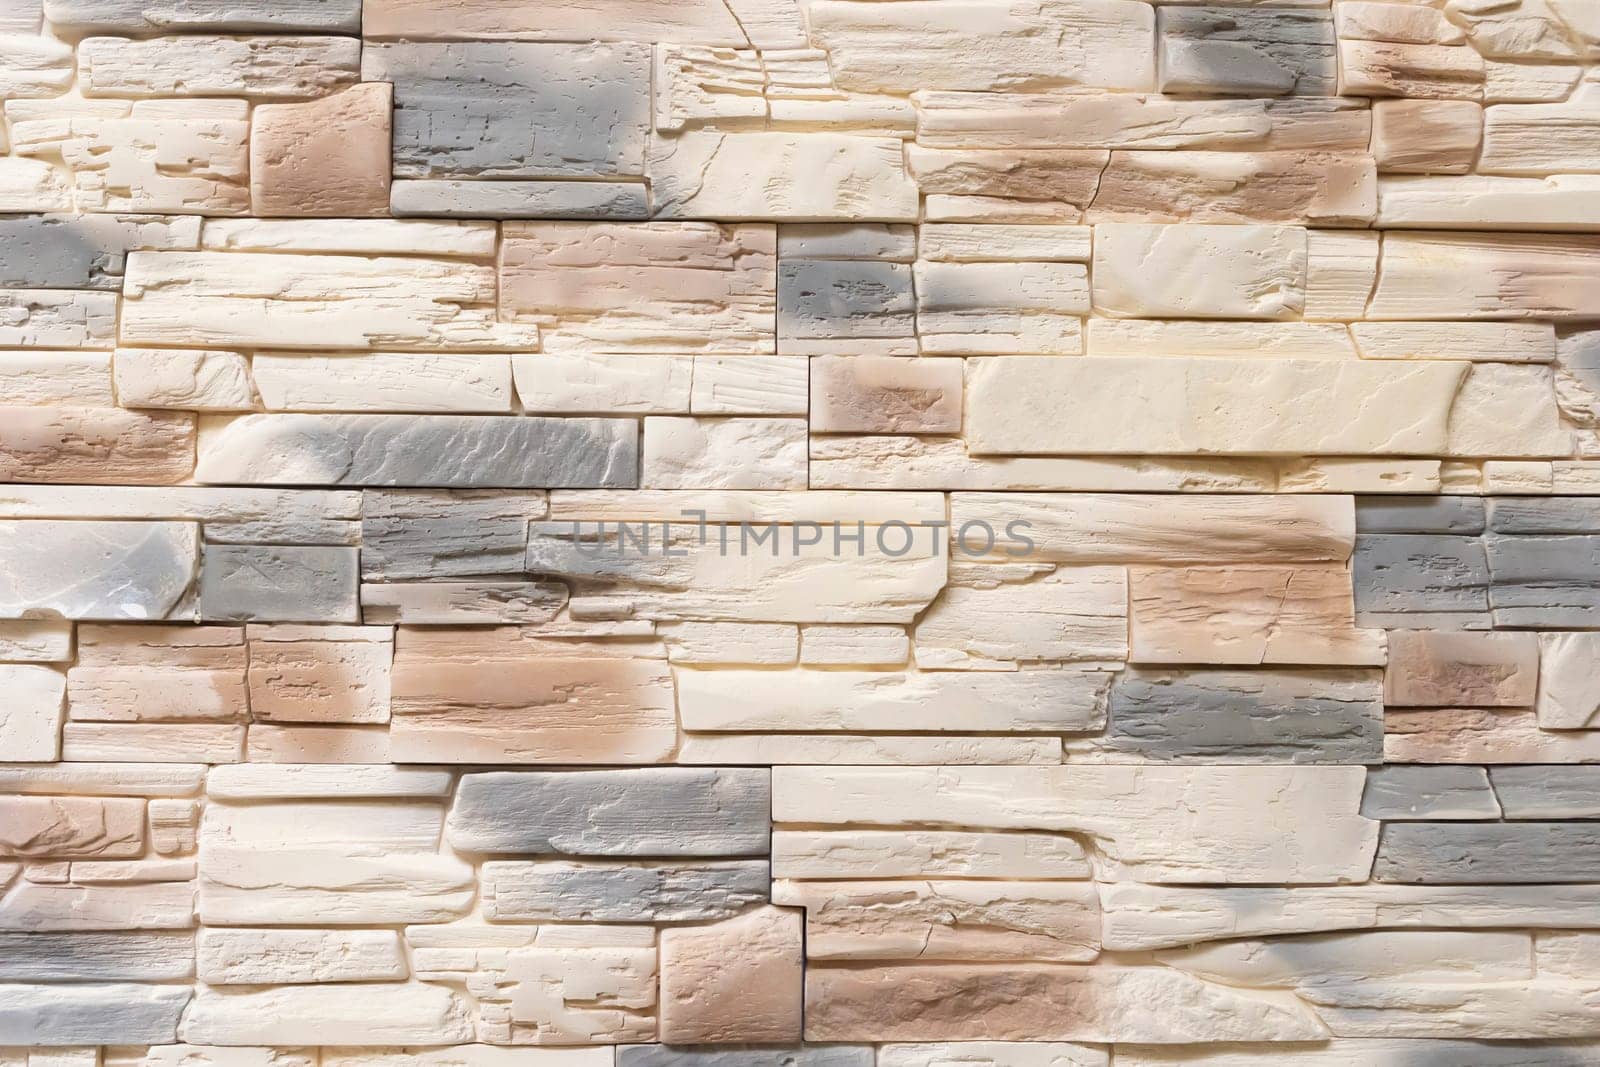 ingots, bars, blocks, brick of white beige grey brown decorative stones, tiles lay one on another, in appropriate manner, modern interior, facade. Pattern, background, original look. Horizontal by netatsi